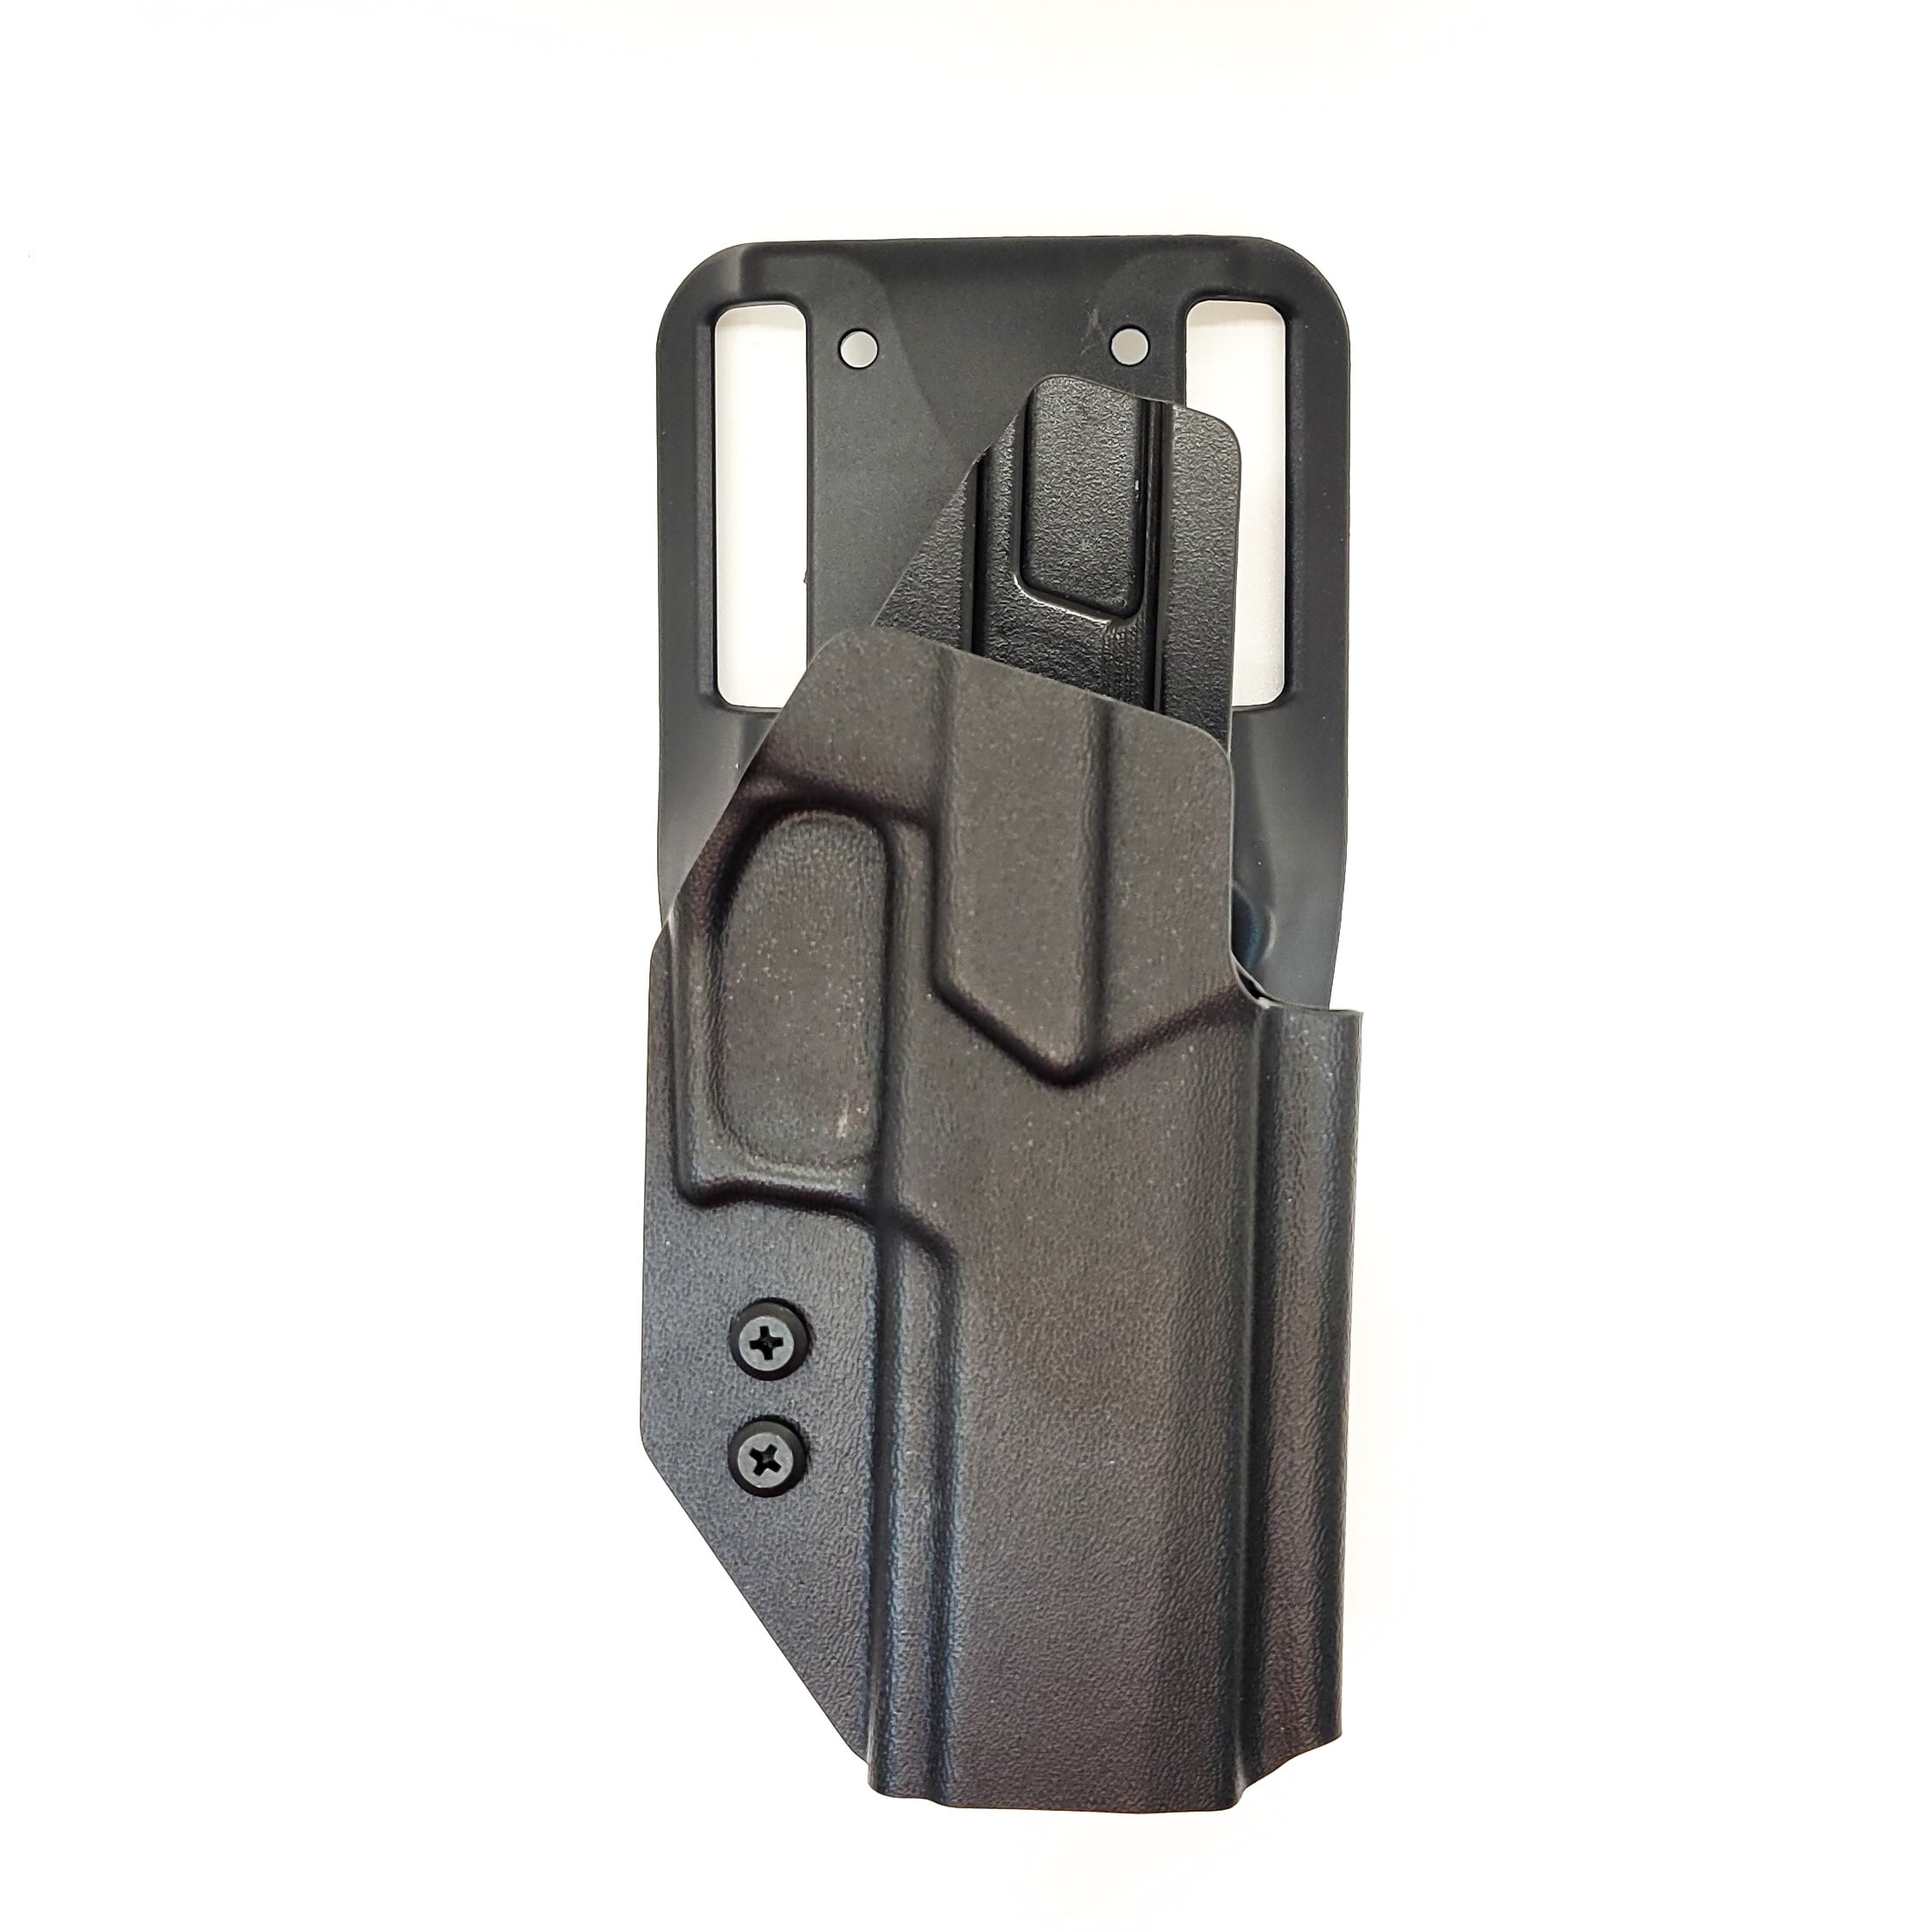 Outside waistband competition style holster designed to fit the P320 Carry pistols, including the M18, with the Align Tactical Thumb Rest. This holster will also fit the P320 Wilson Combat Carry grip module. The holster will work with or without the Align Tactical Thumb Rest installed on the pistol.